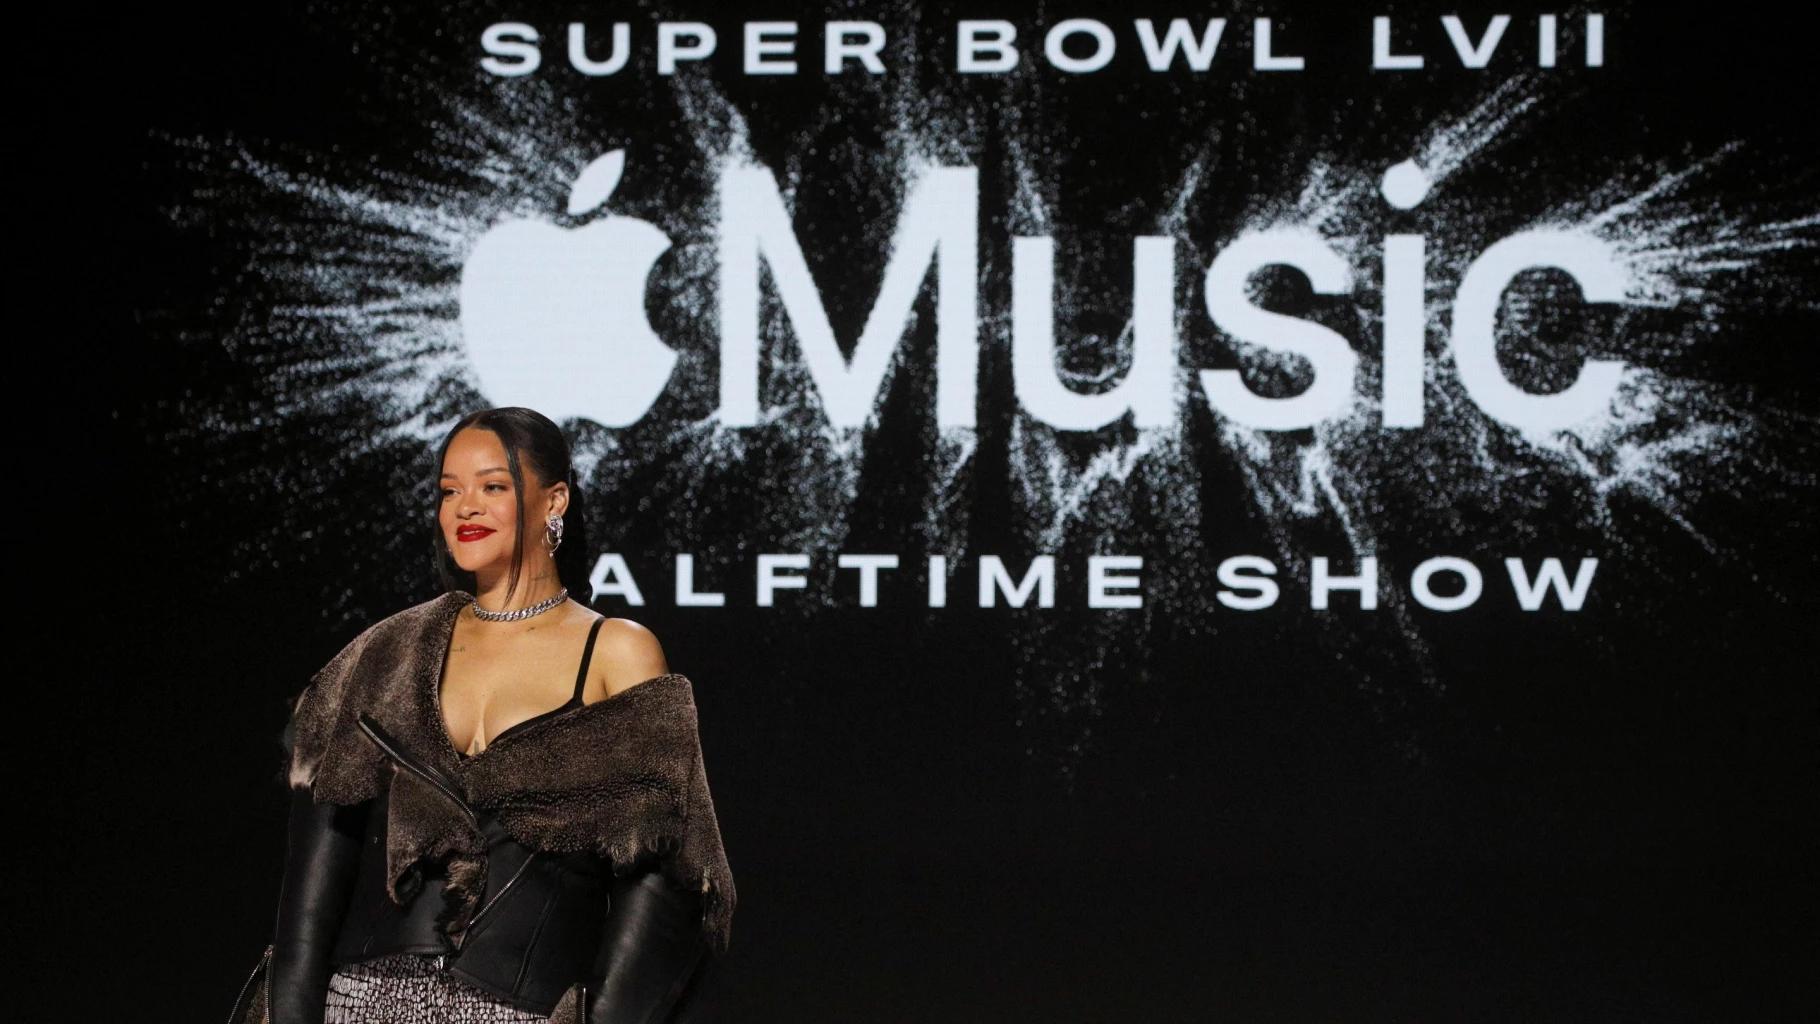 New mom Rihanna excited to return to stage for Super Bowl halftime show